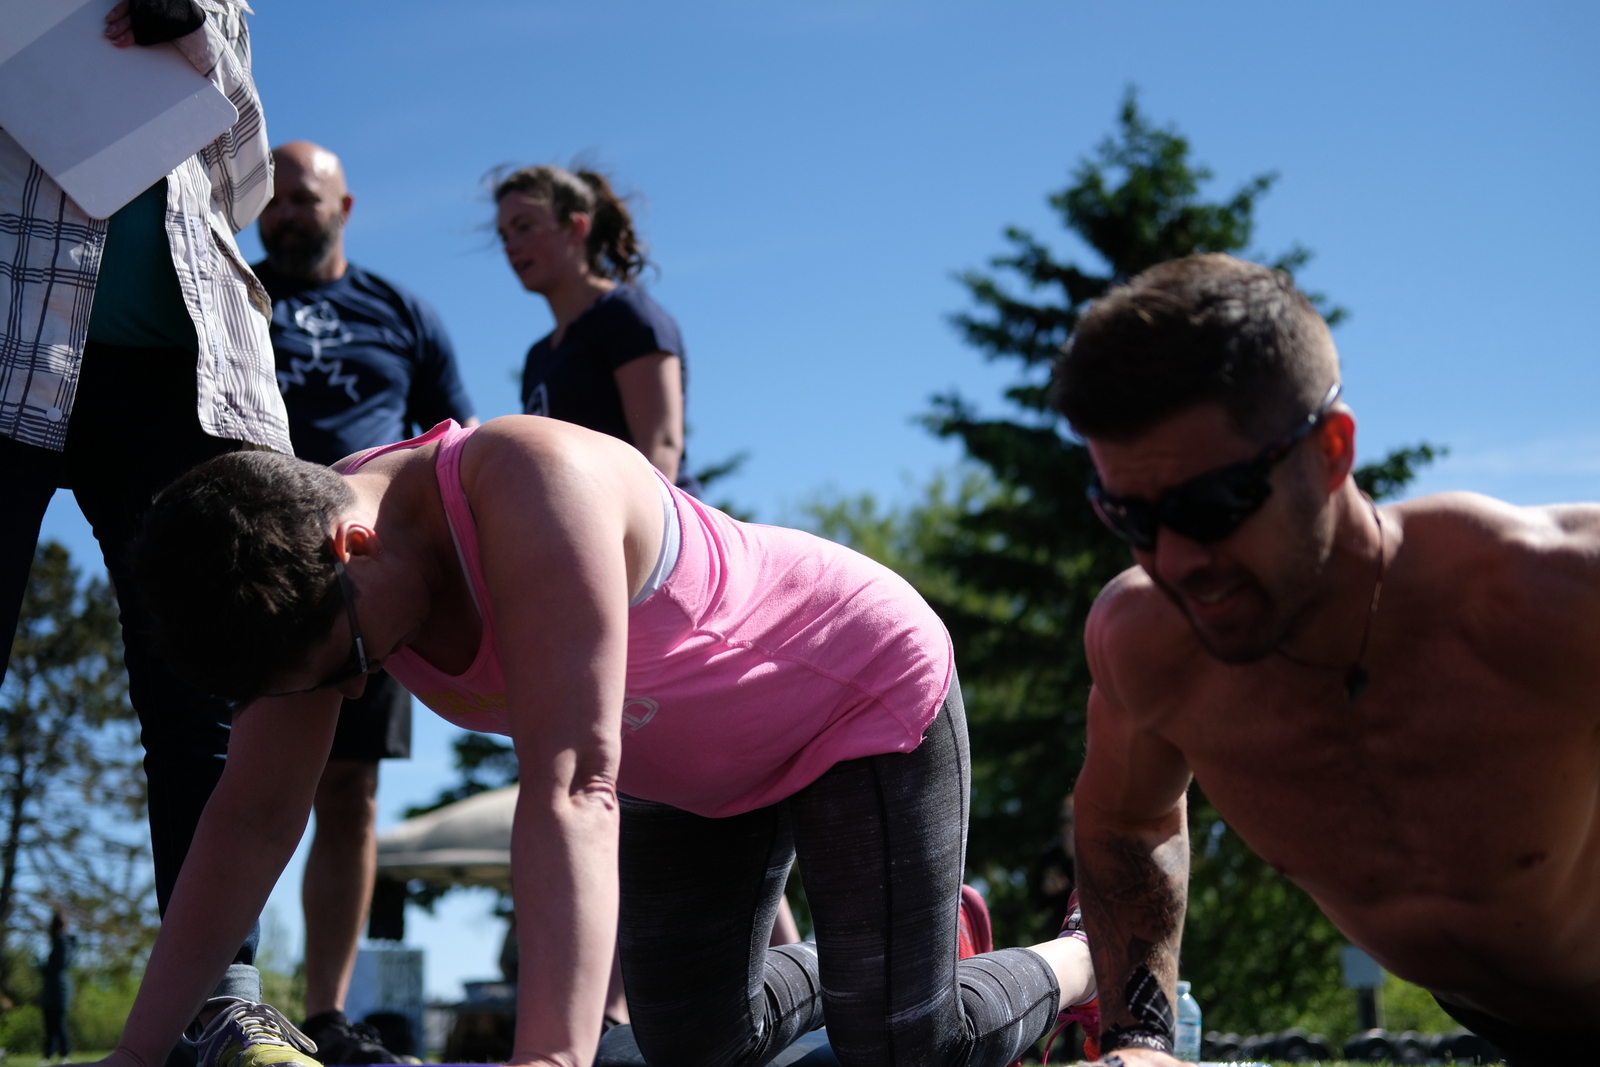 CrossFit Sudbury – 06072018 – “Well now one of us has to change…”